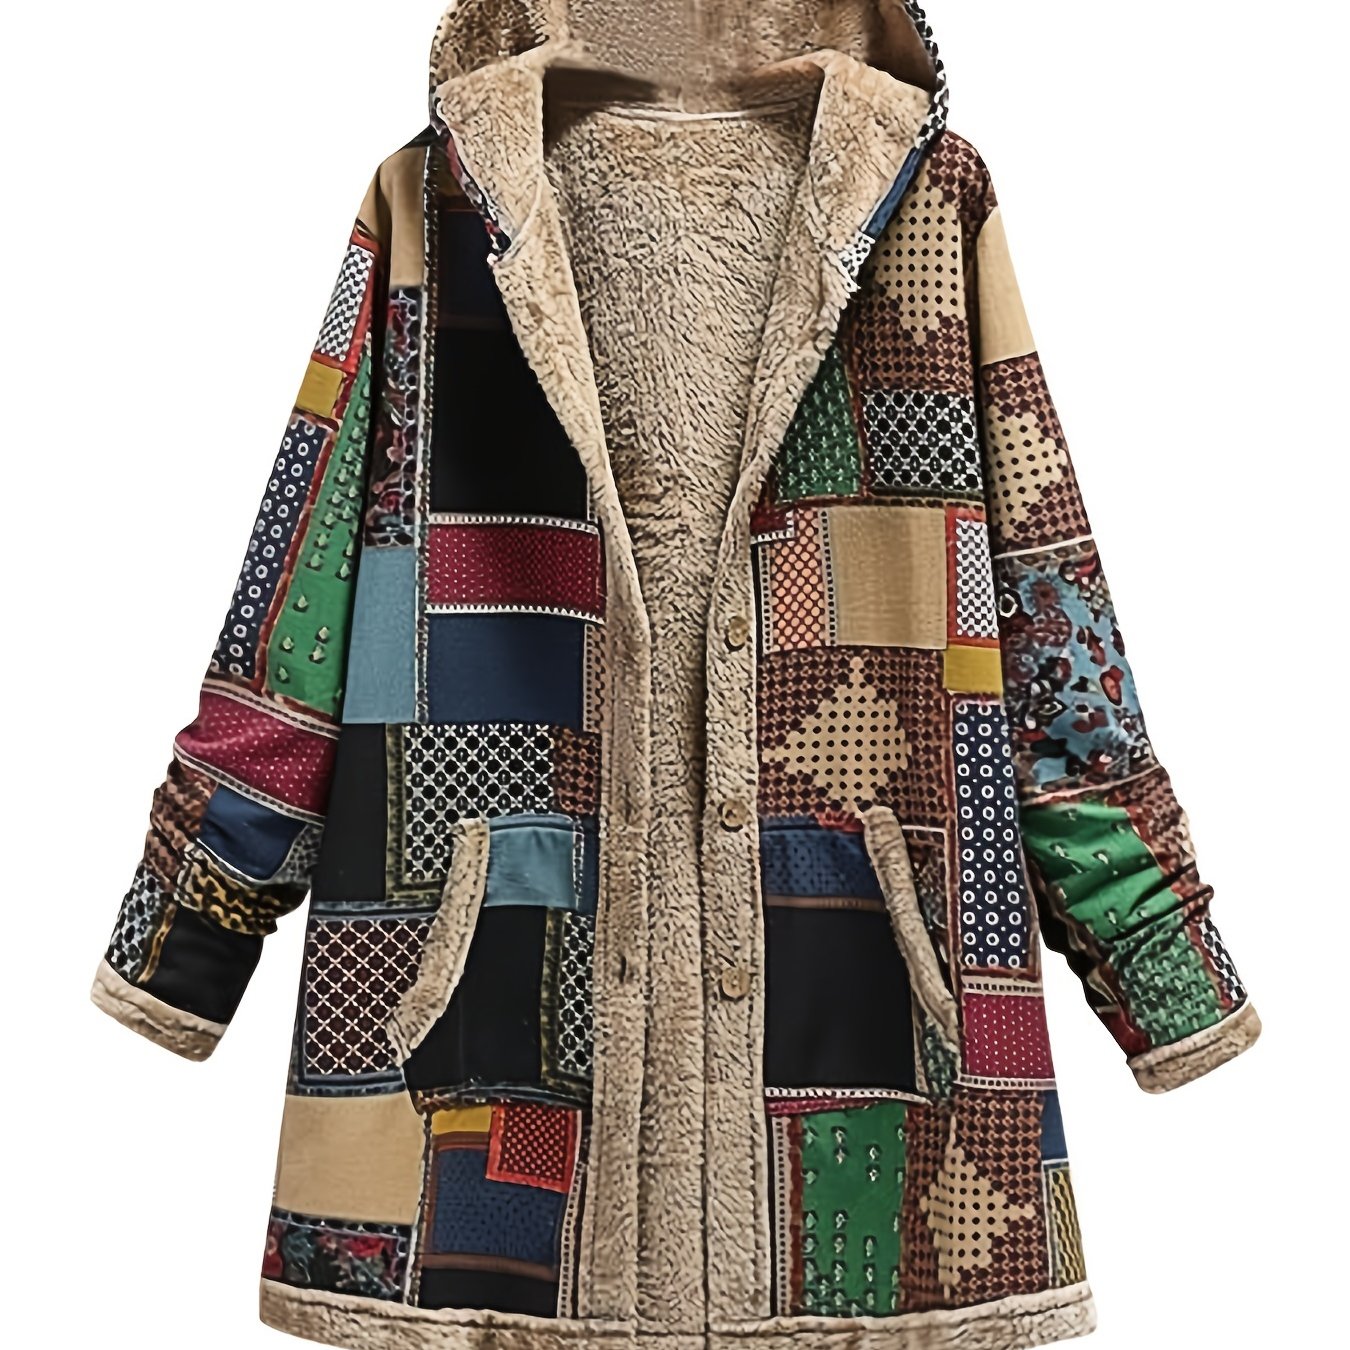 vlovelaw  Retro Patchwork Hooded Jacket, Long Sleeve Button Up Casual Outerwear For Fall & Winter, Women's Clothing